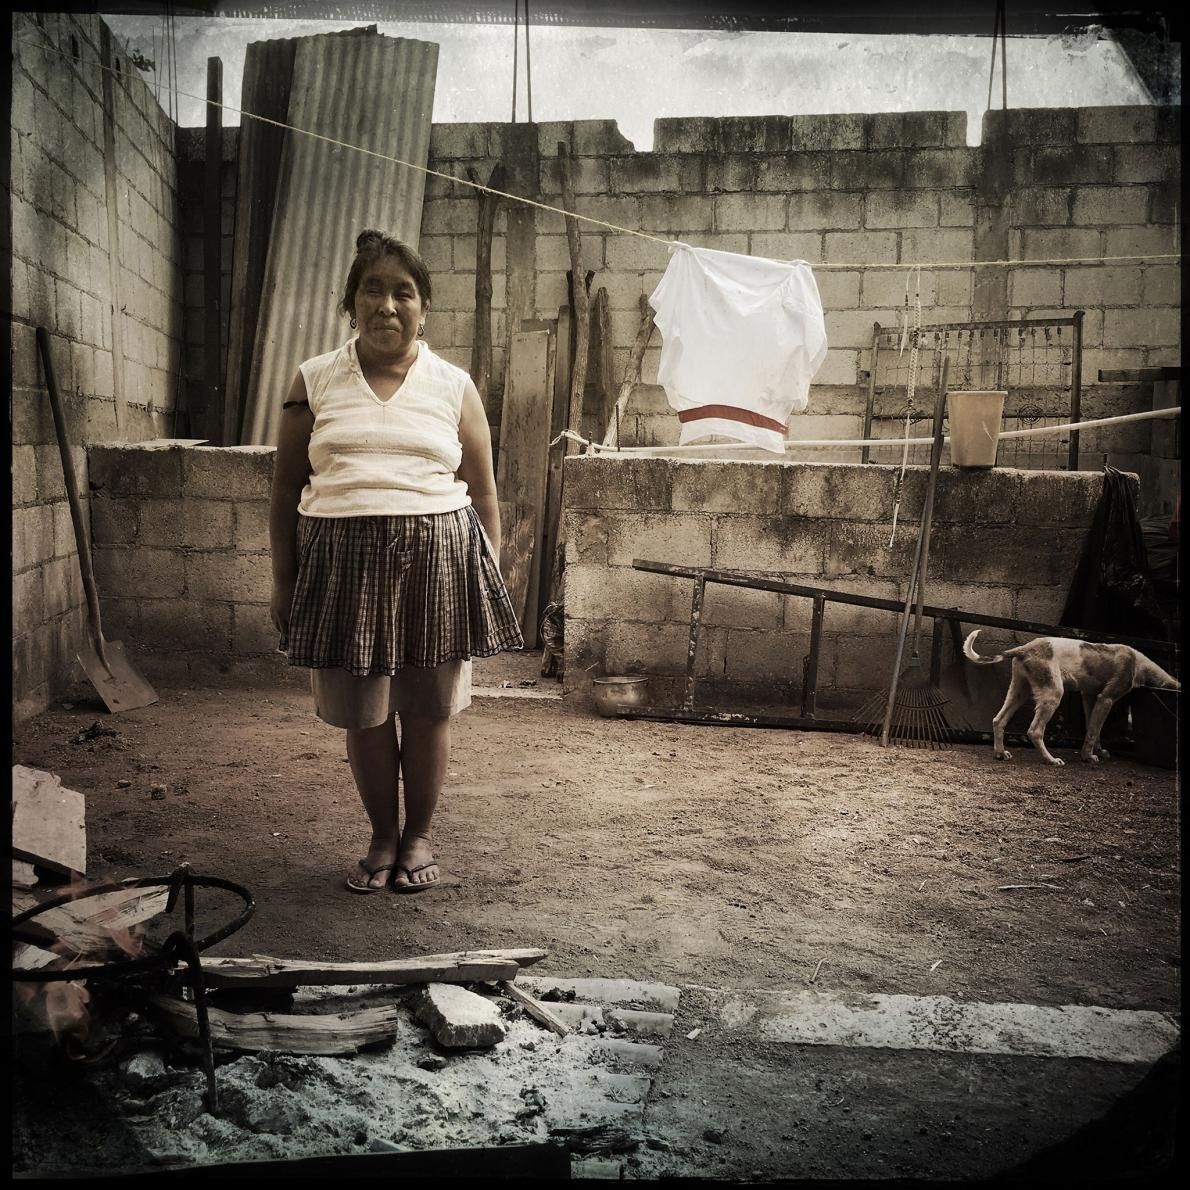 San Antonio Aguas Calientes: Maria Ermelinda Lopez Mendoza stands in her cooking area in her courtyard. She can’t afford a stove, so she cooks over this makeshift open flame. Image by Lynn Johnson. Guatemala, 2017.